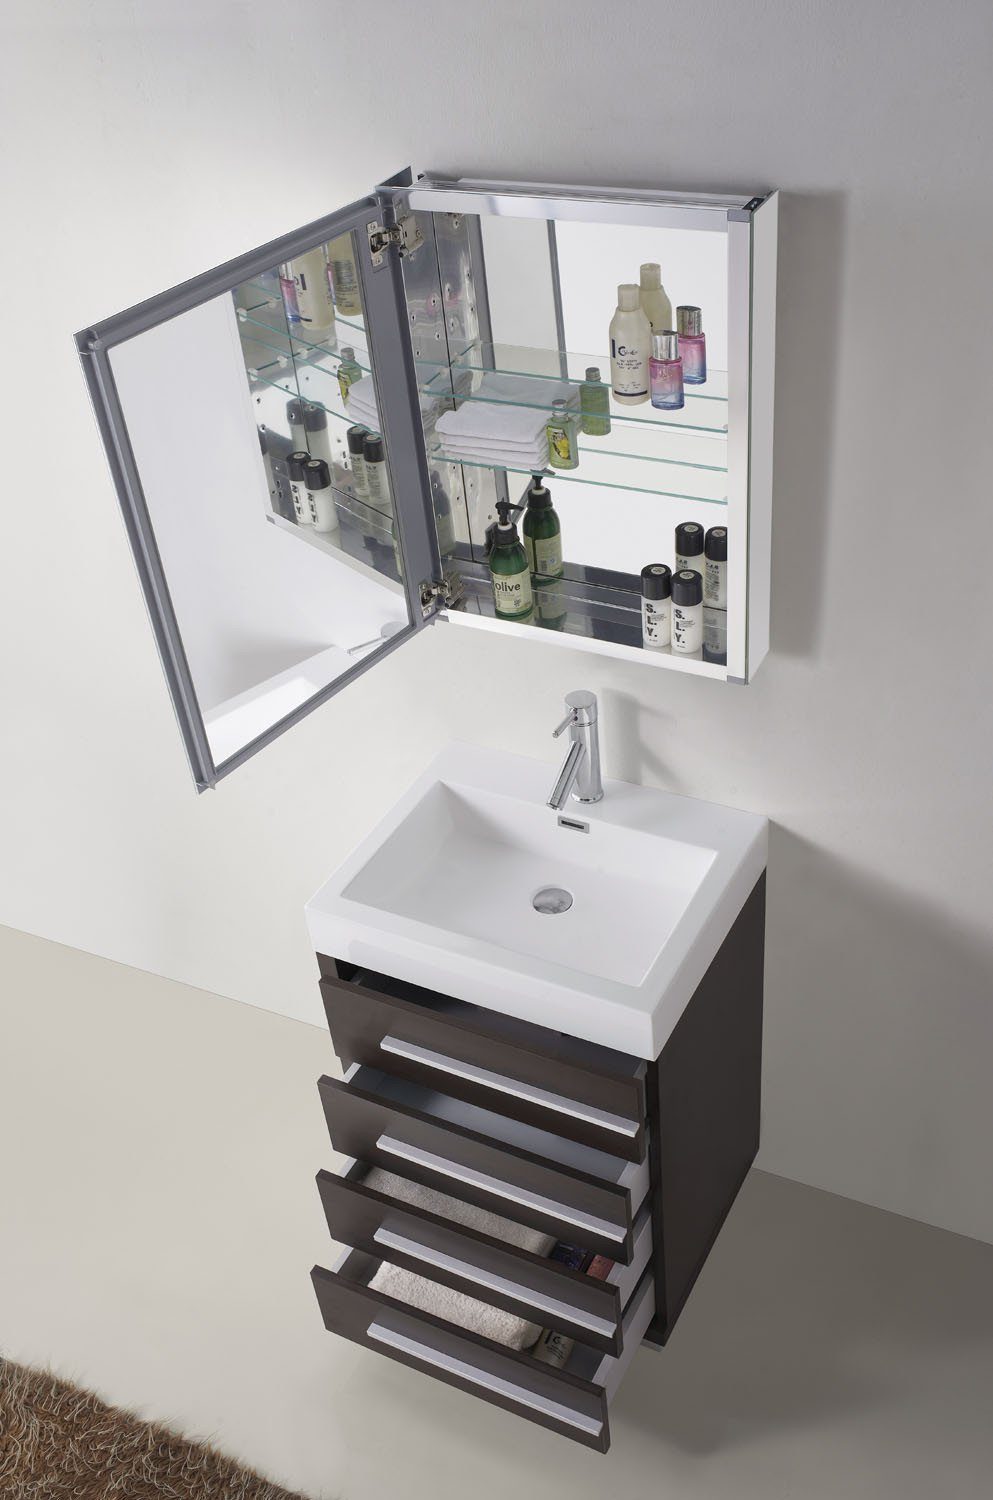 Virtu USA Bailey 24" Single Square Sink Wenge Top Vanity in Wenge with Polished Chrome Faucet and Mirror Vanity Virtu USA 